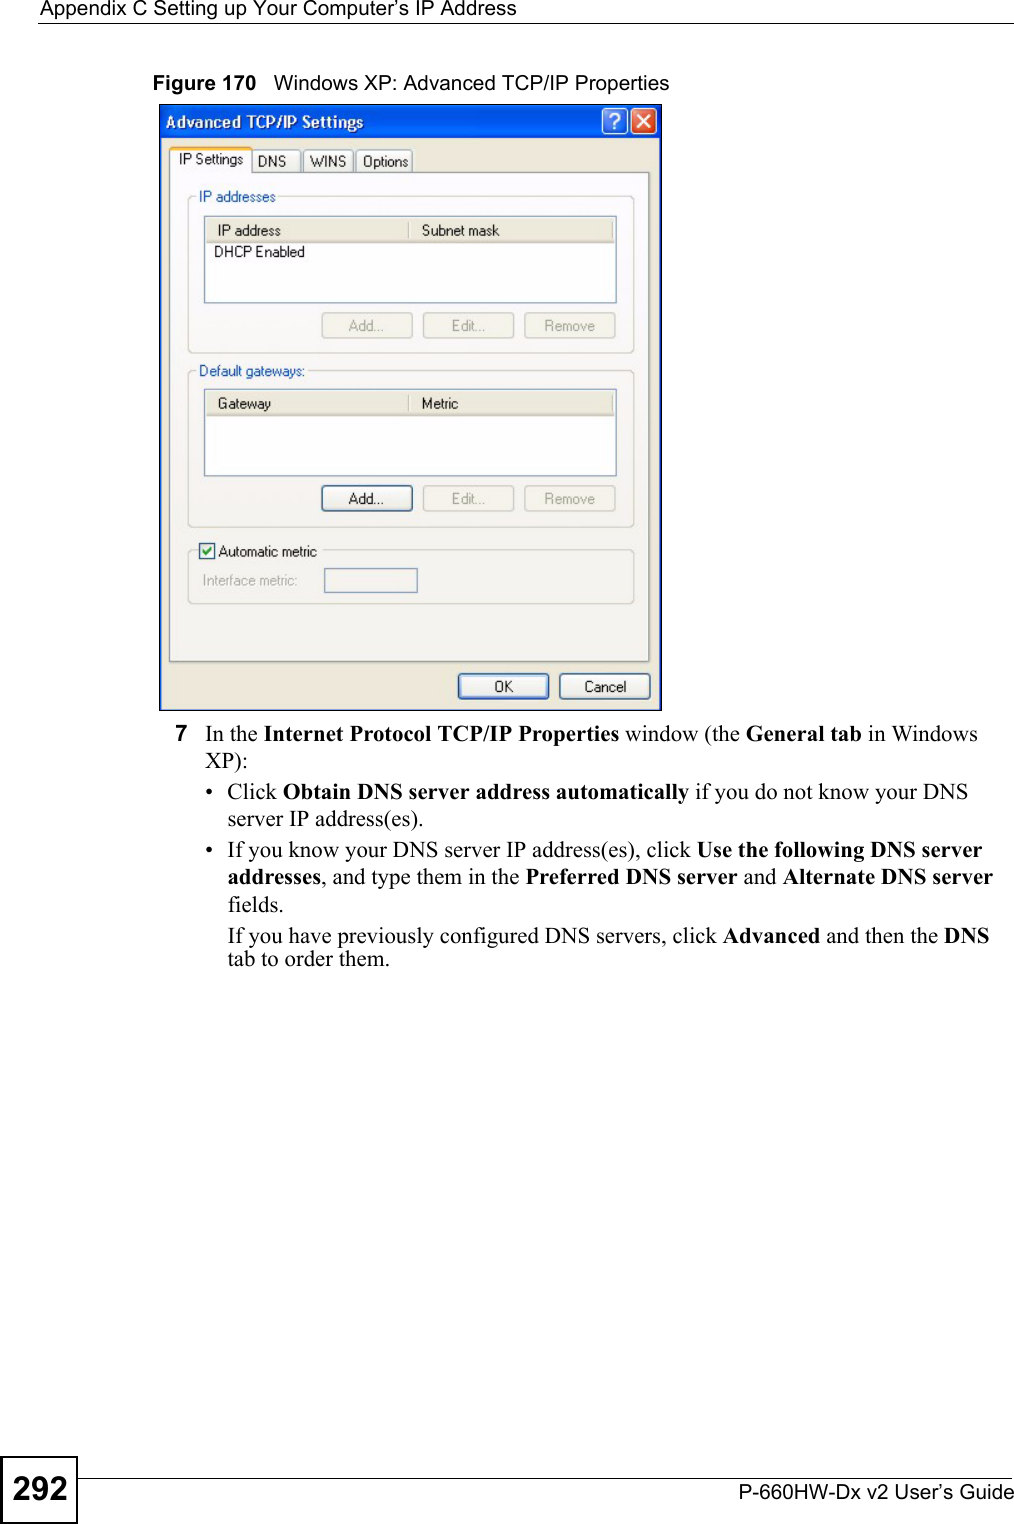 Appendix C Setting up Your Computer’s IP AddressP-660HW-Dx v2 User’s Guide292Figure 170   Windows XP: Advanced TCP/IP Properties7In the Internet Protocol TCP/IP Properties window (the General tab in Windows XP):• Click Obtain DNS server address automatically if you do not know your DNS server IP address(es).• If you know your DNS server IP address(es), click Use the following DNS server addresses, and type them in the Preferred DNS server and Alternate DNS server fields. If you have previously configured DNS servers, click Advanced and then the DNS tab to order them.